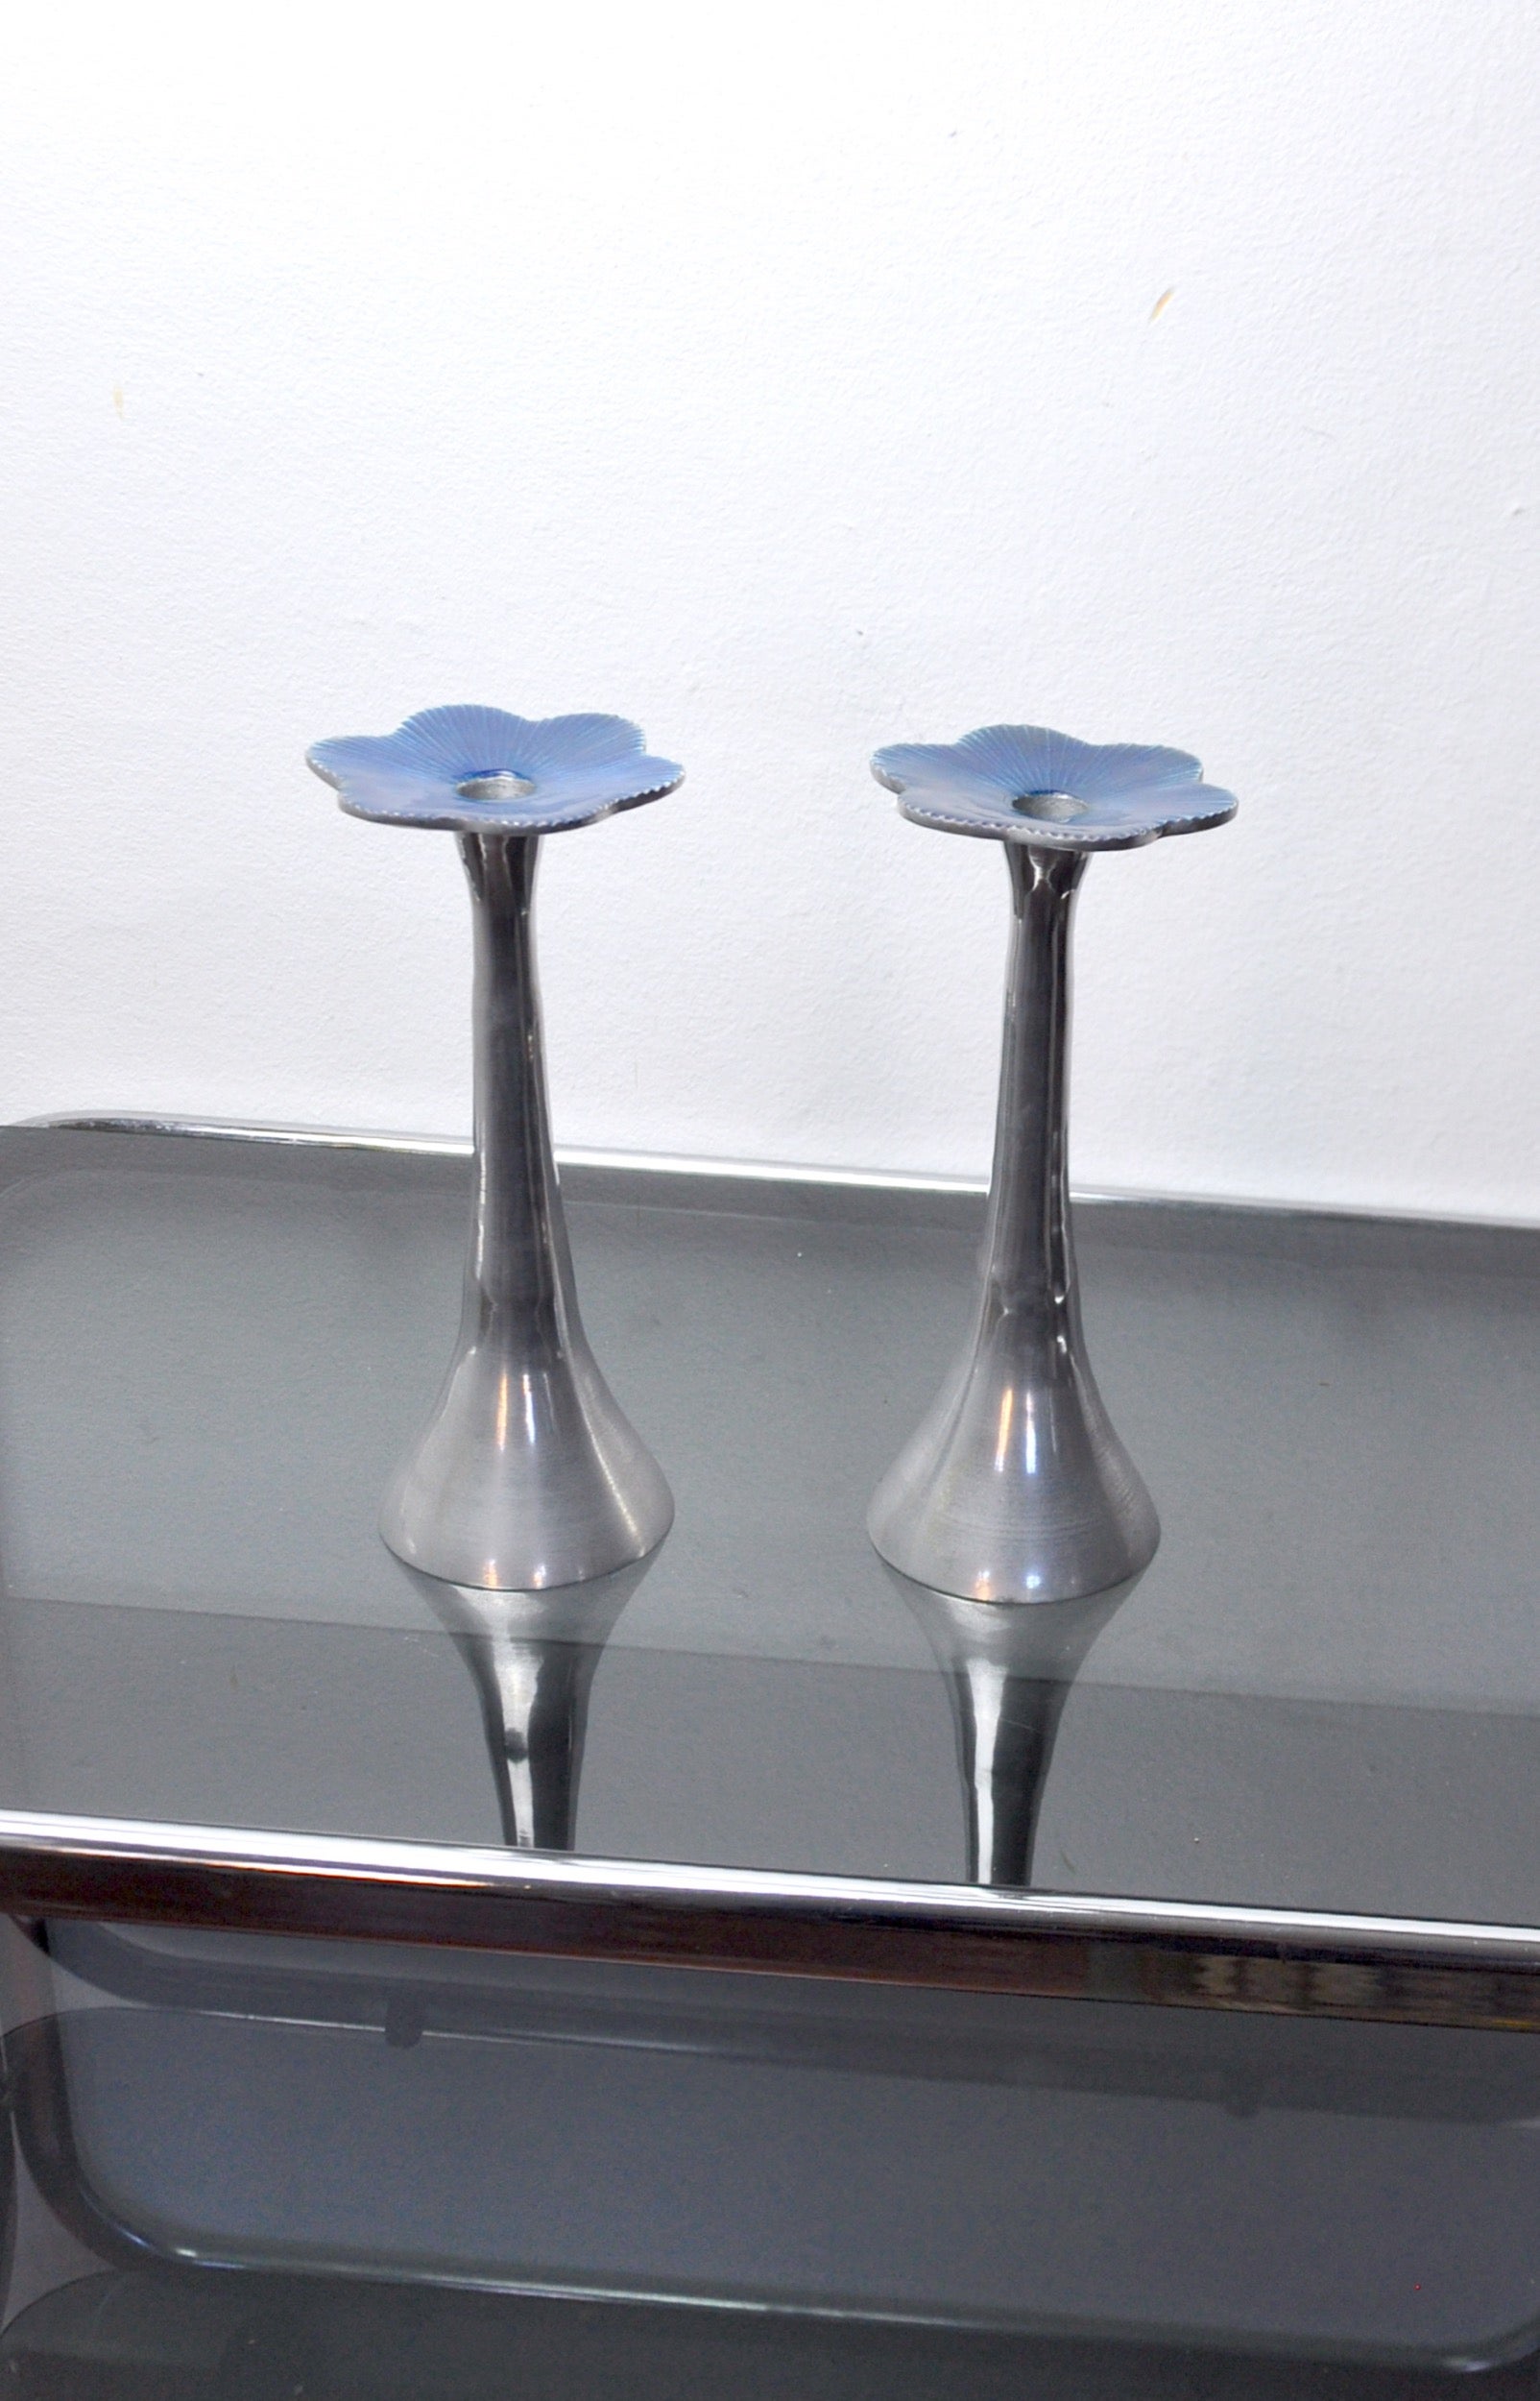 Hollywood Regency Pair of Floral Brutalist Candlesticks by David Marshall, 1980, Spain For Sale